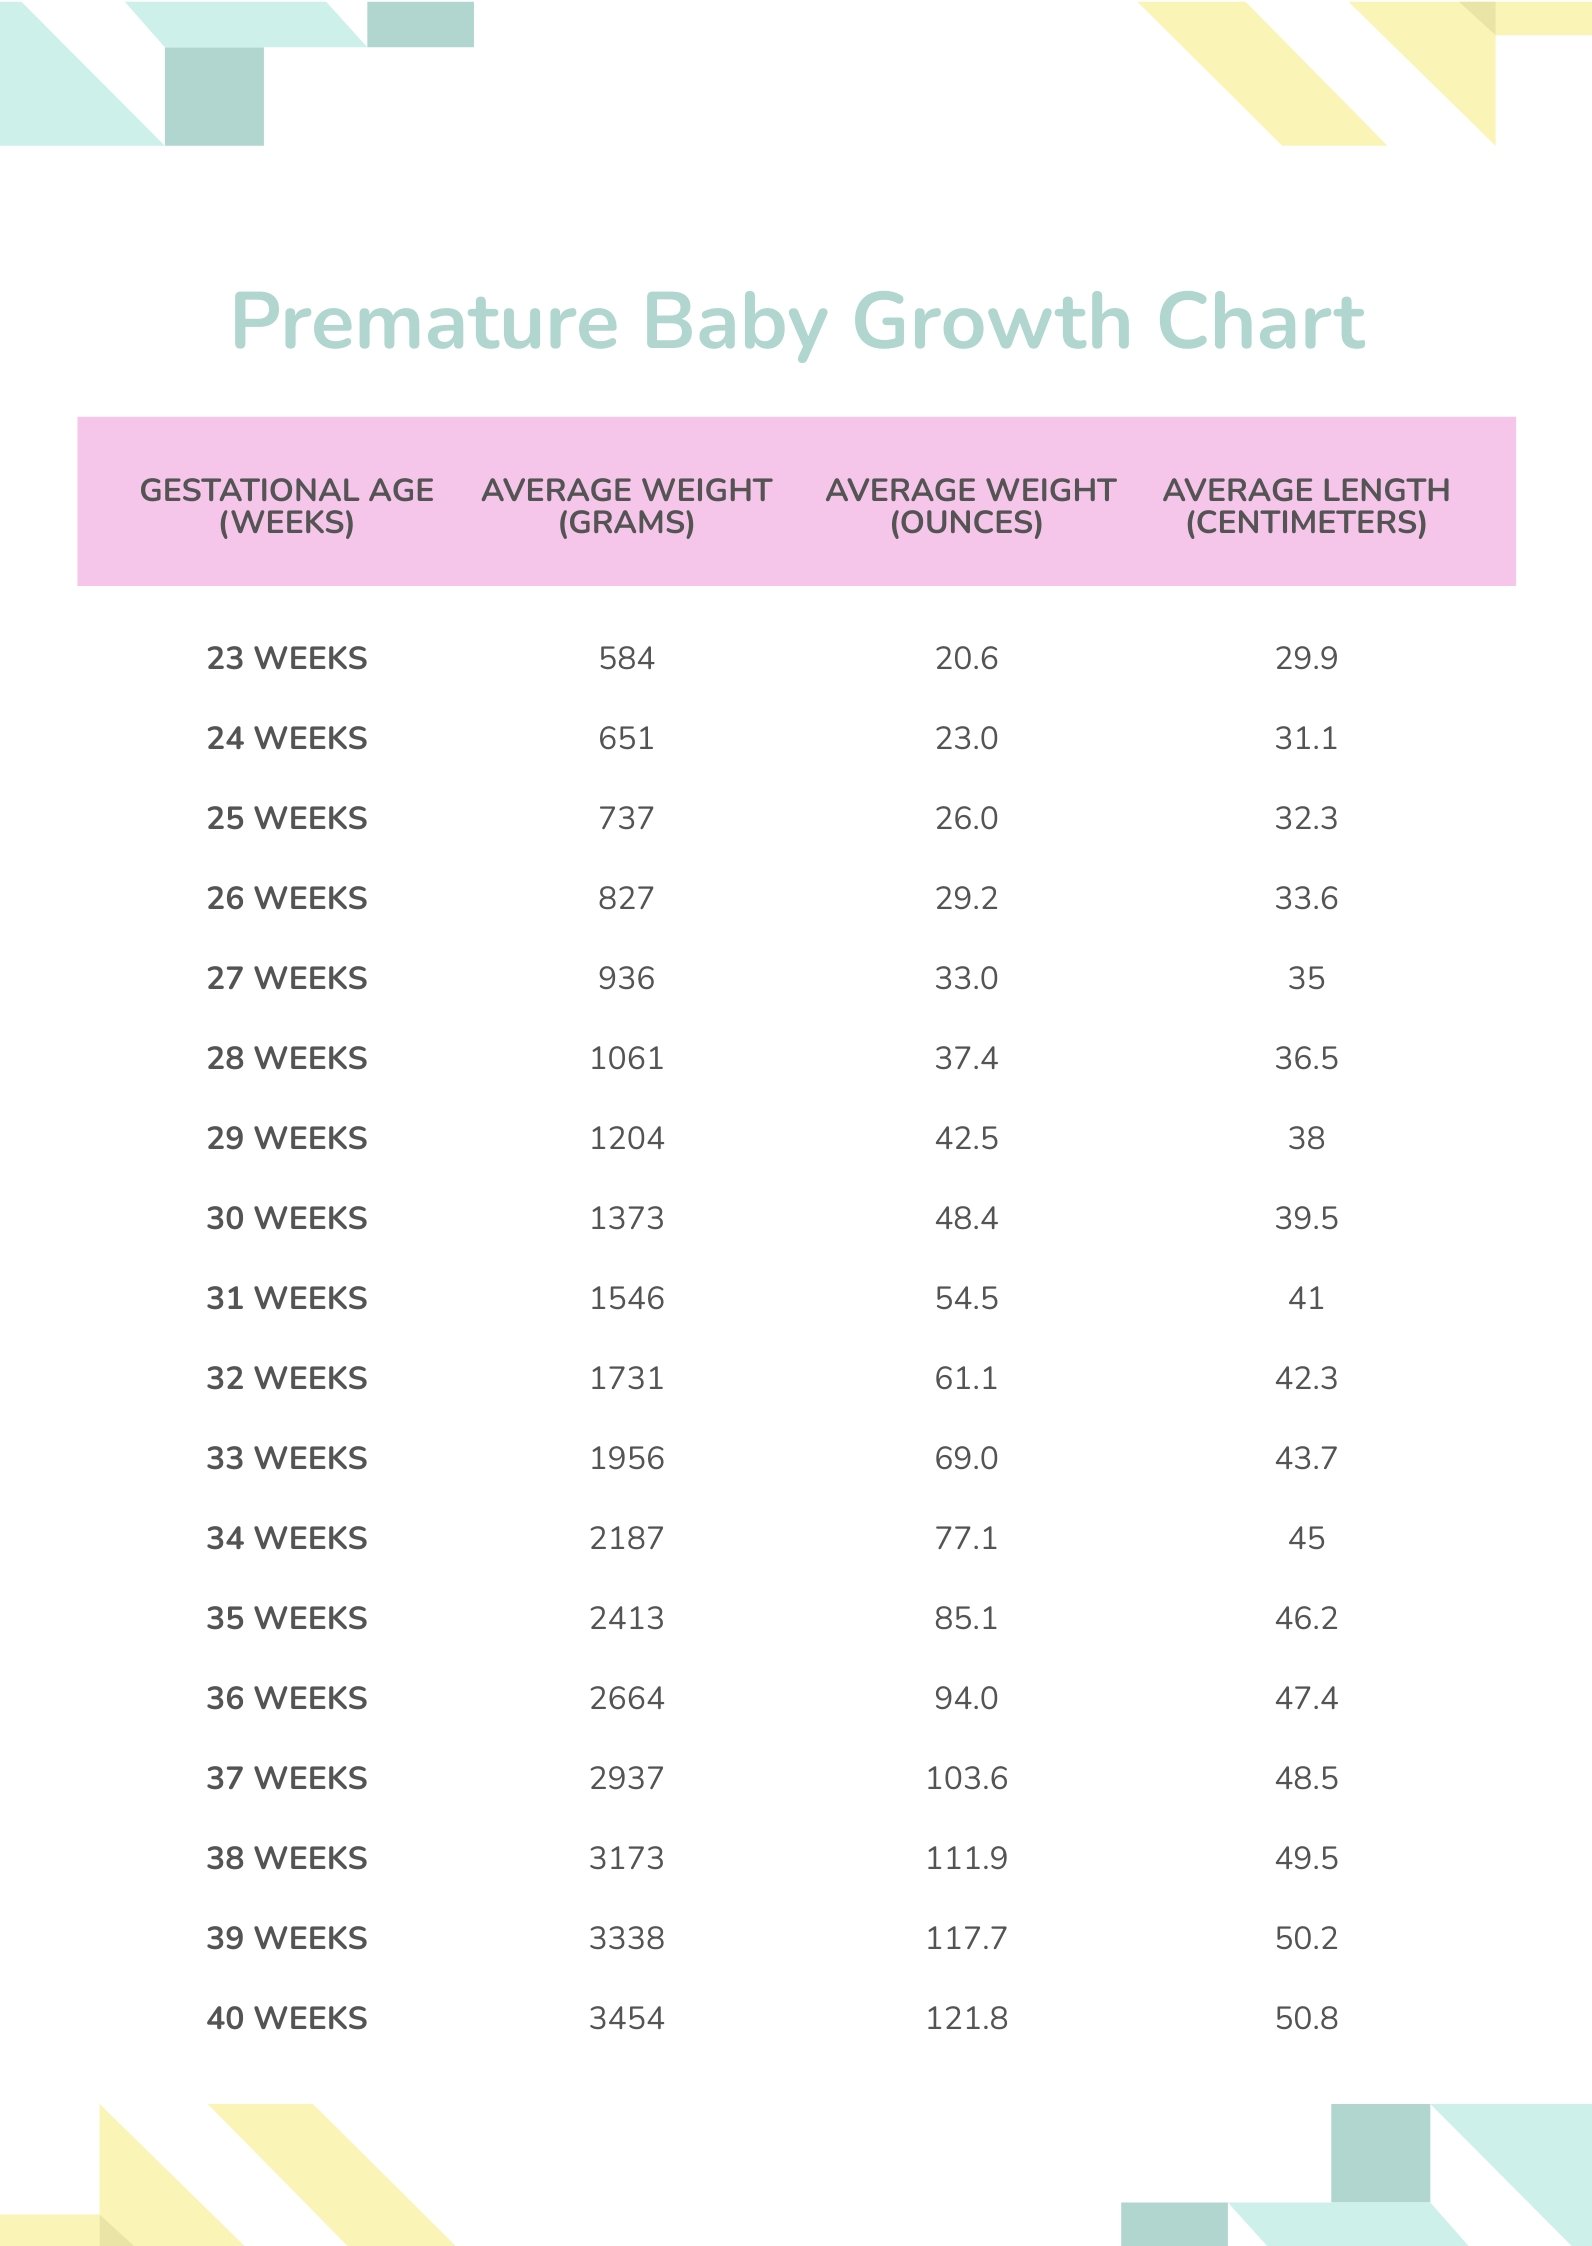 Premature Baby Growth Chart in PDF - Download | Template.net